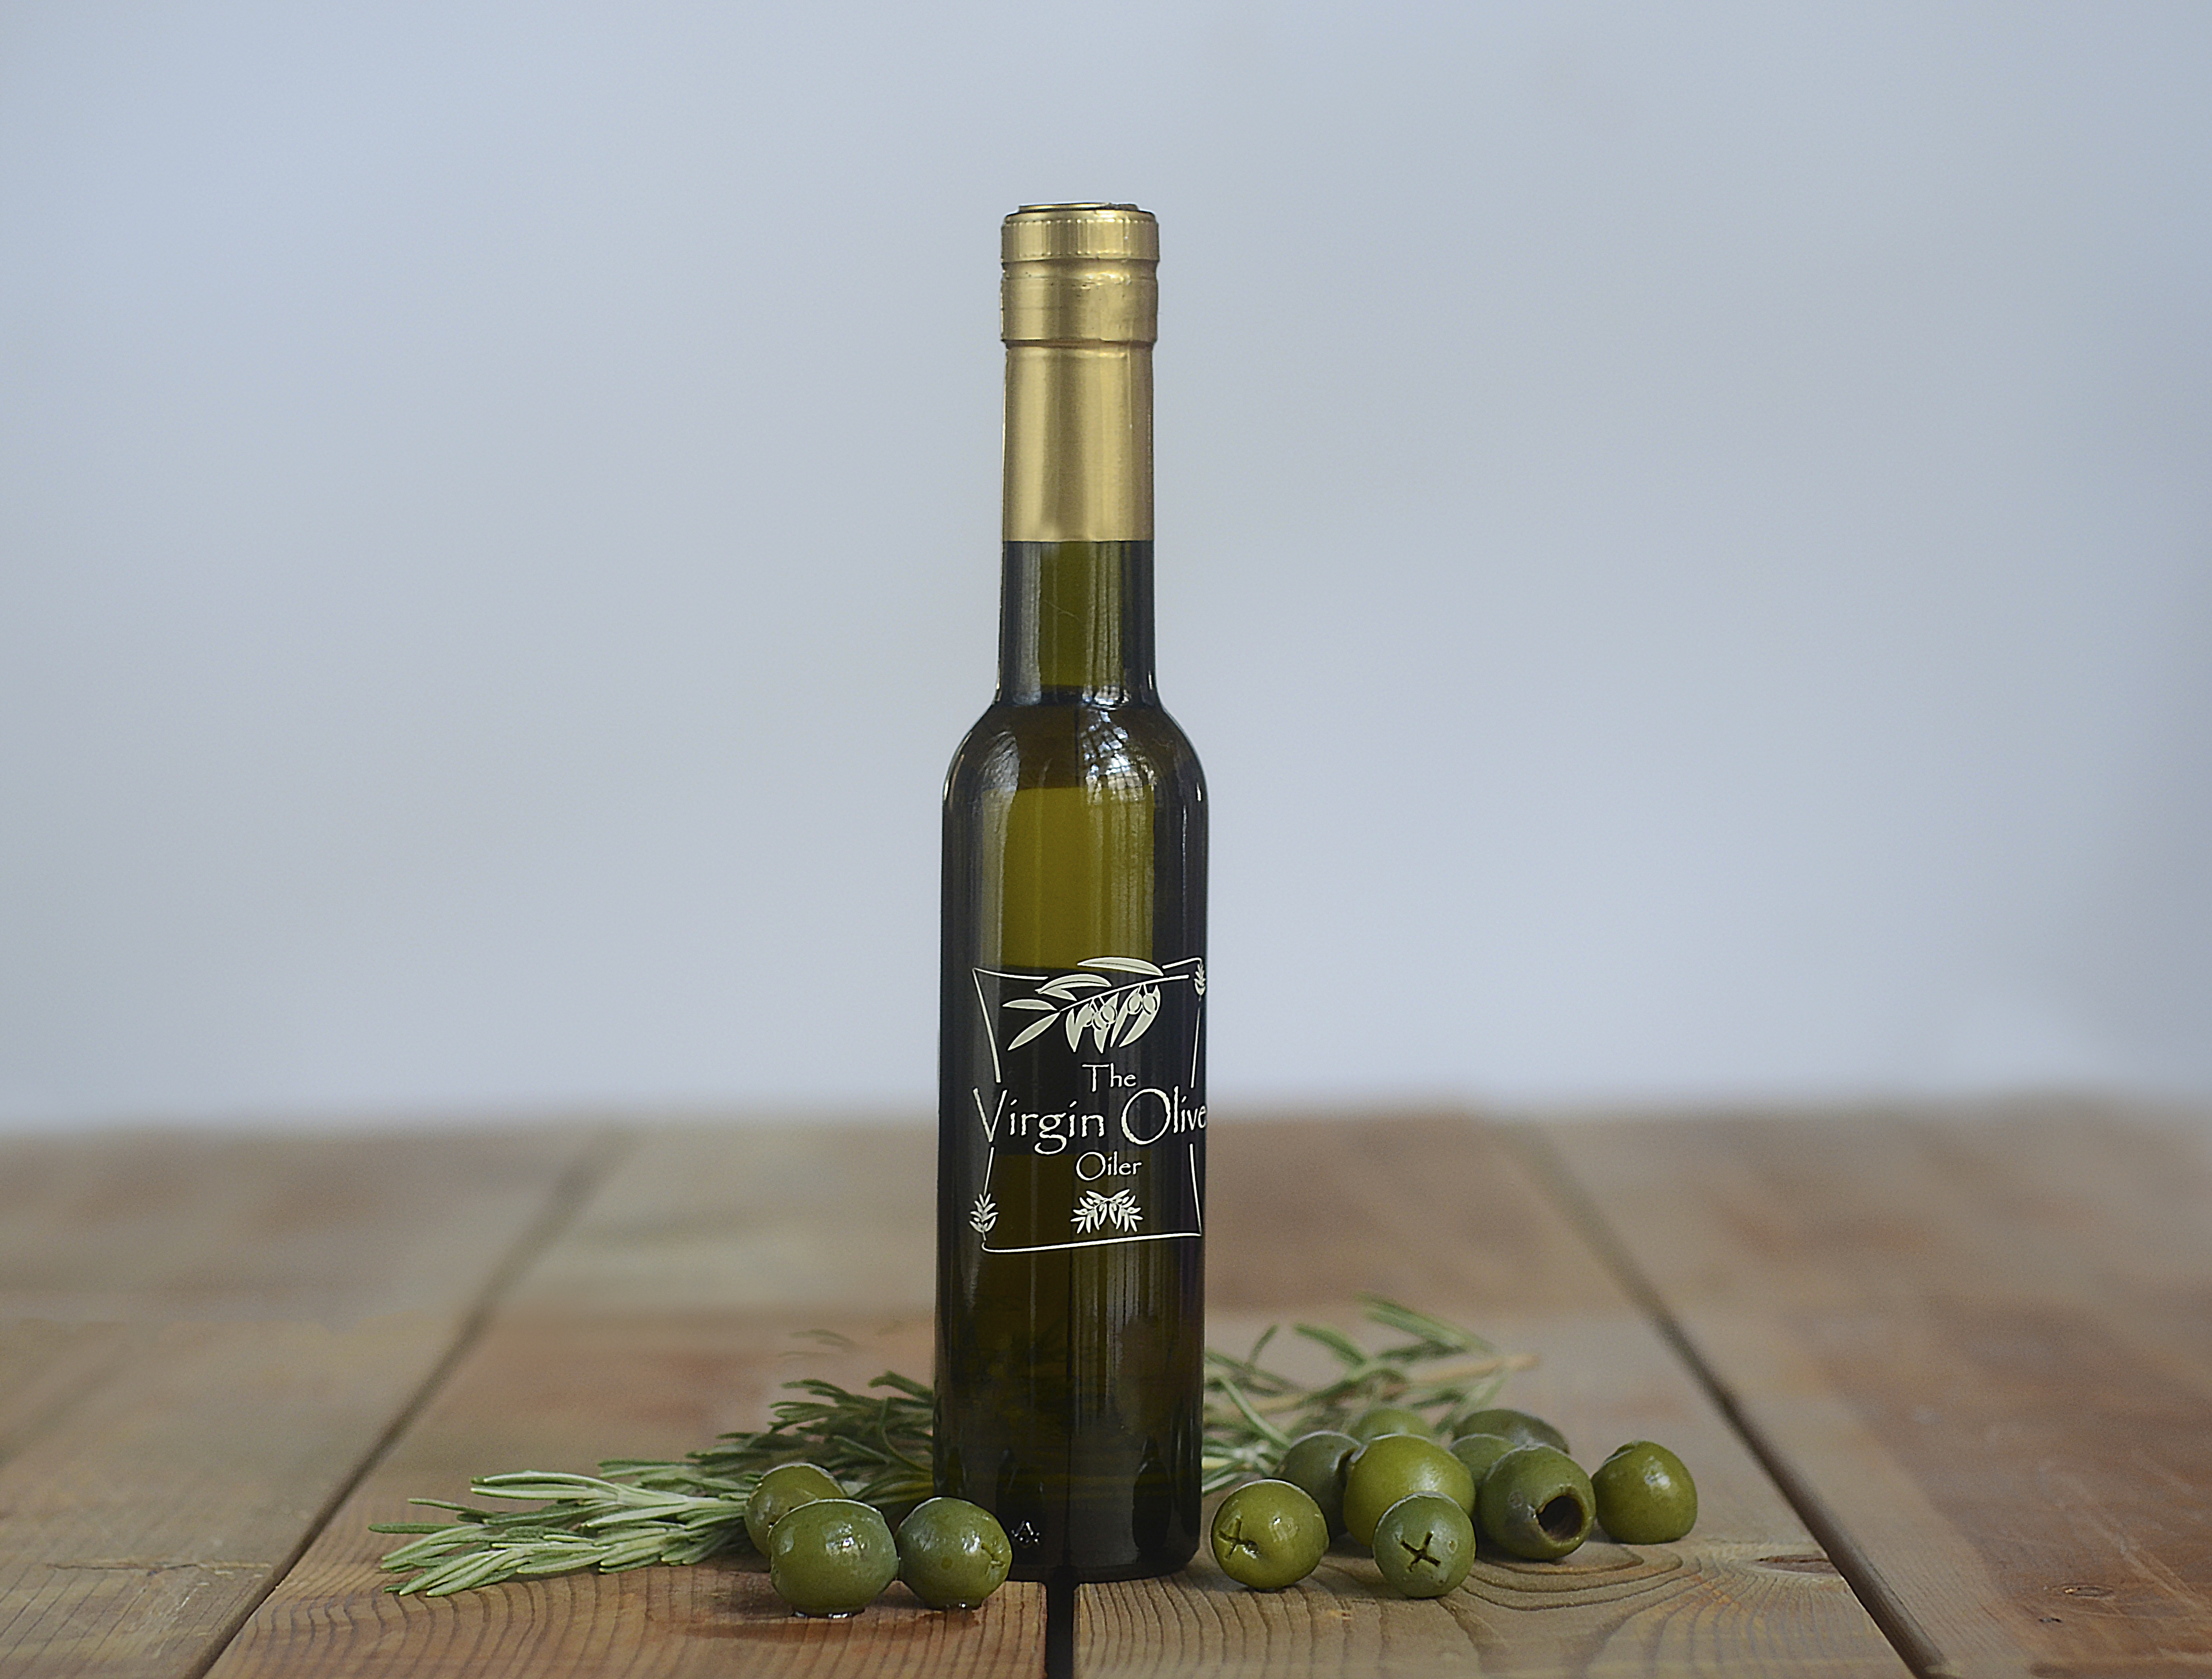 The Virgin Olive Oiler Shares What Real Extra Virgin Olive Should Look Like